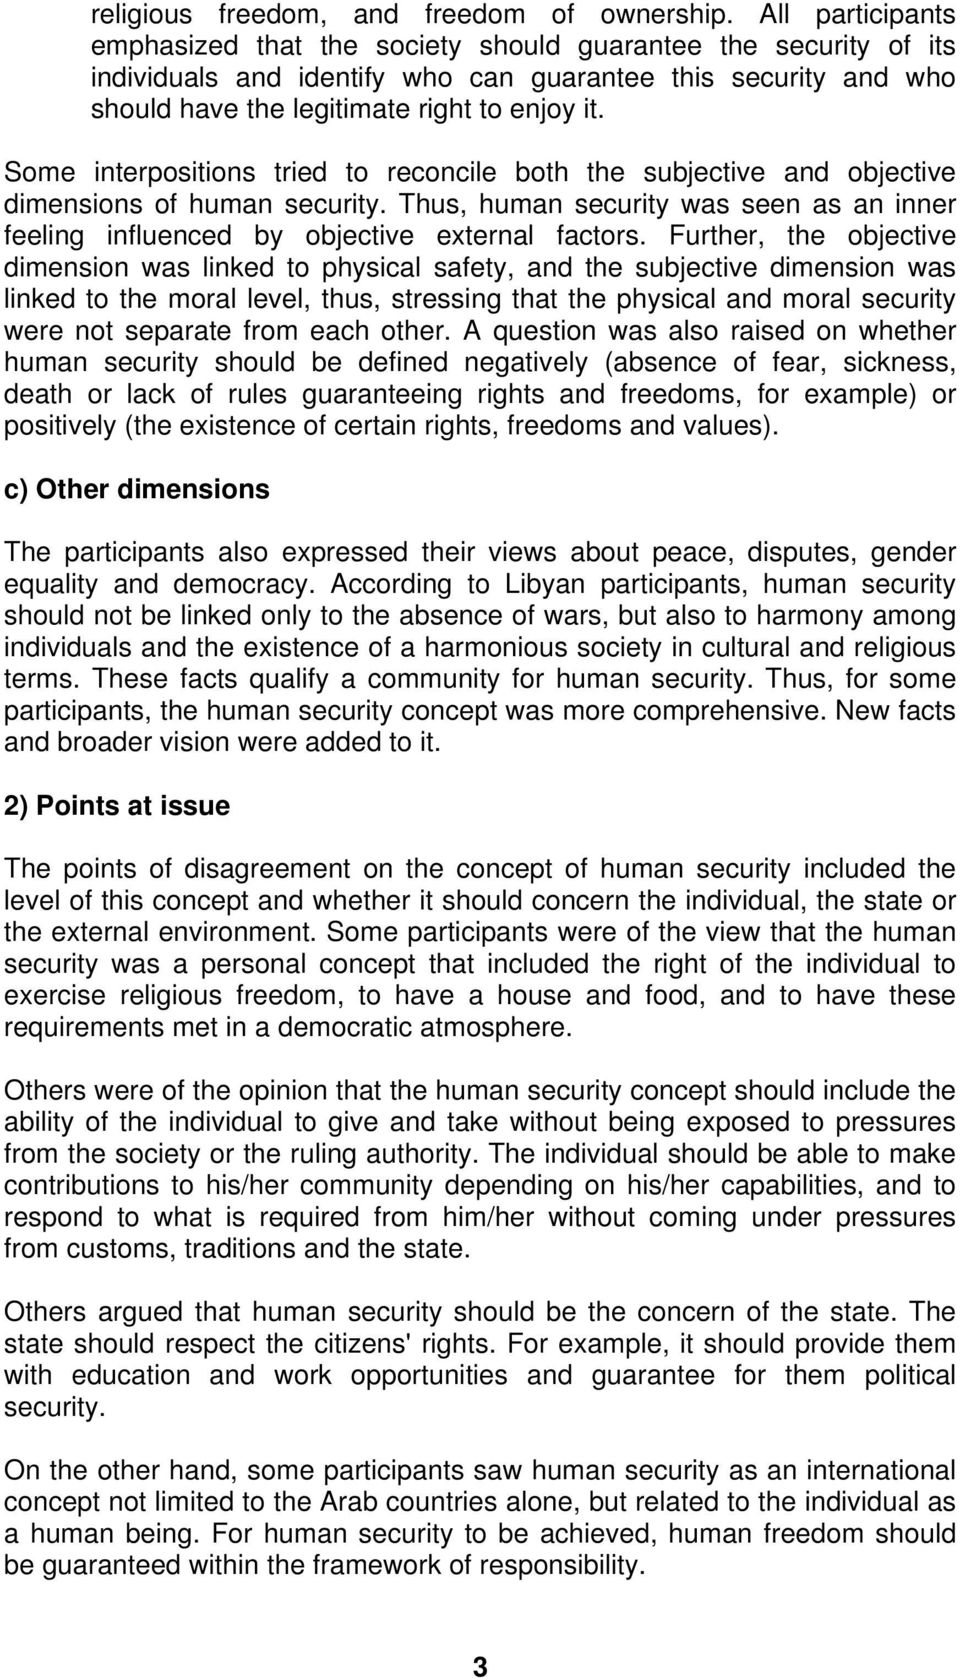 Some interpositions tried to reconcile both the subjective and objective dimensions of human security. Thus, human security was seen as an inner feeling influenced by objective external factors.